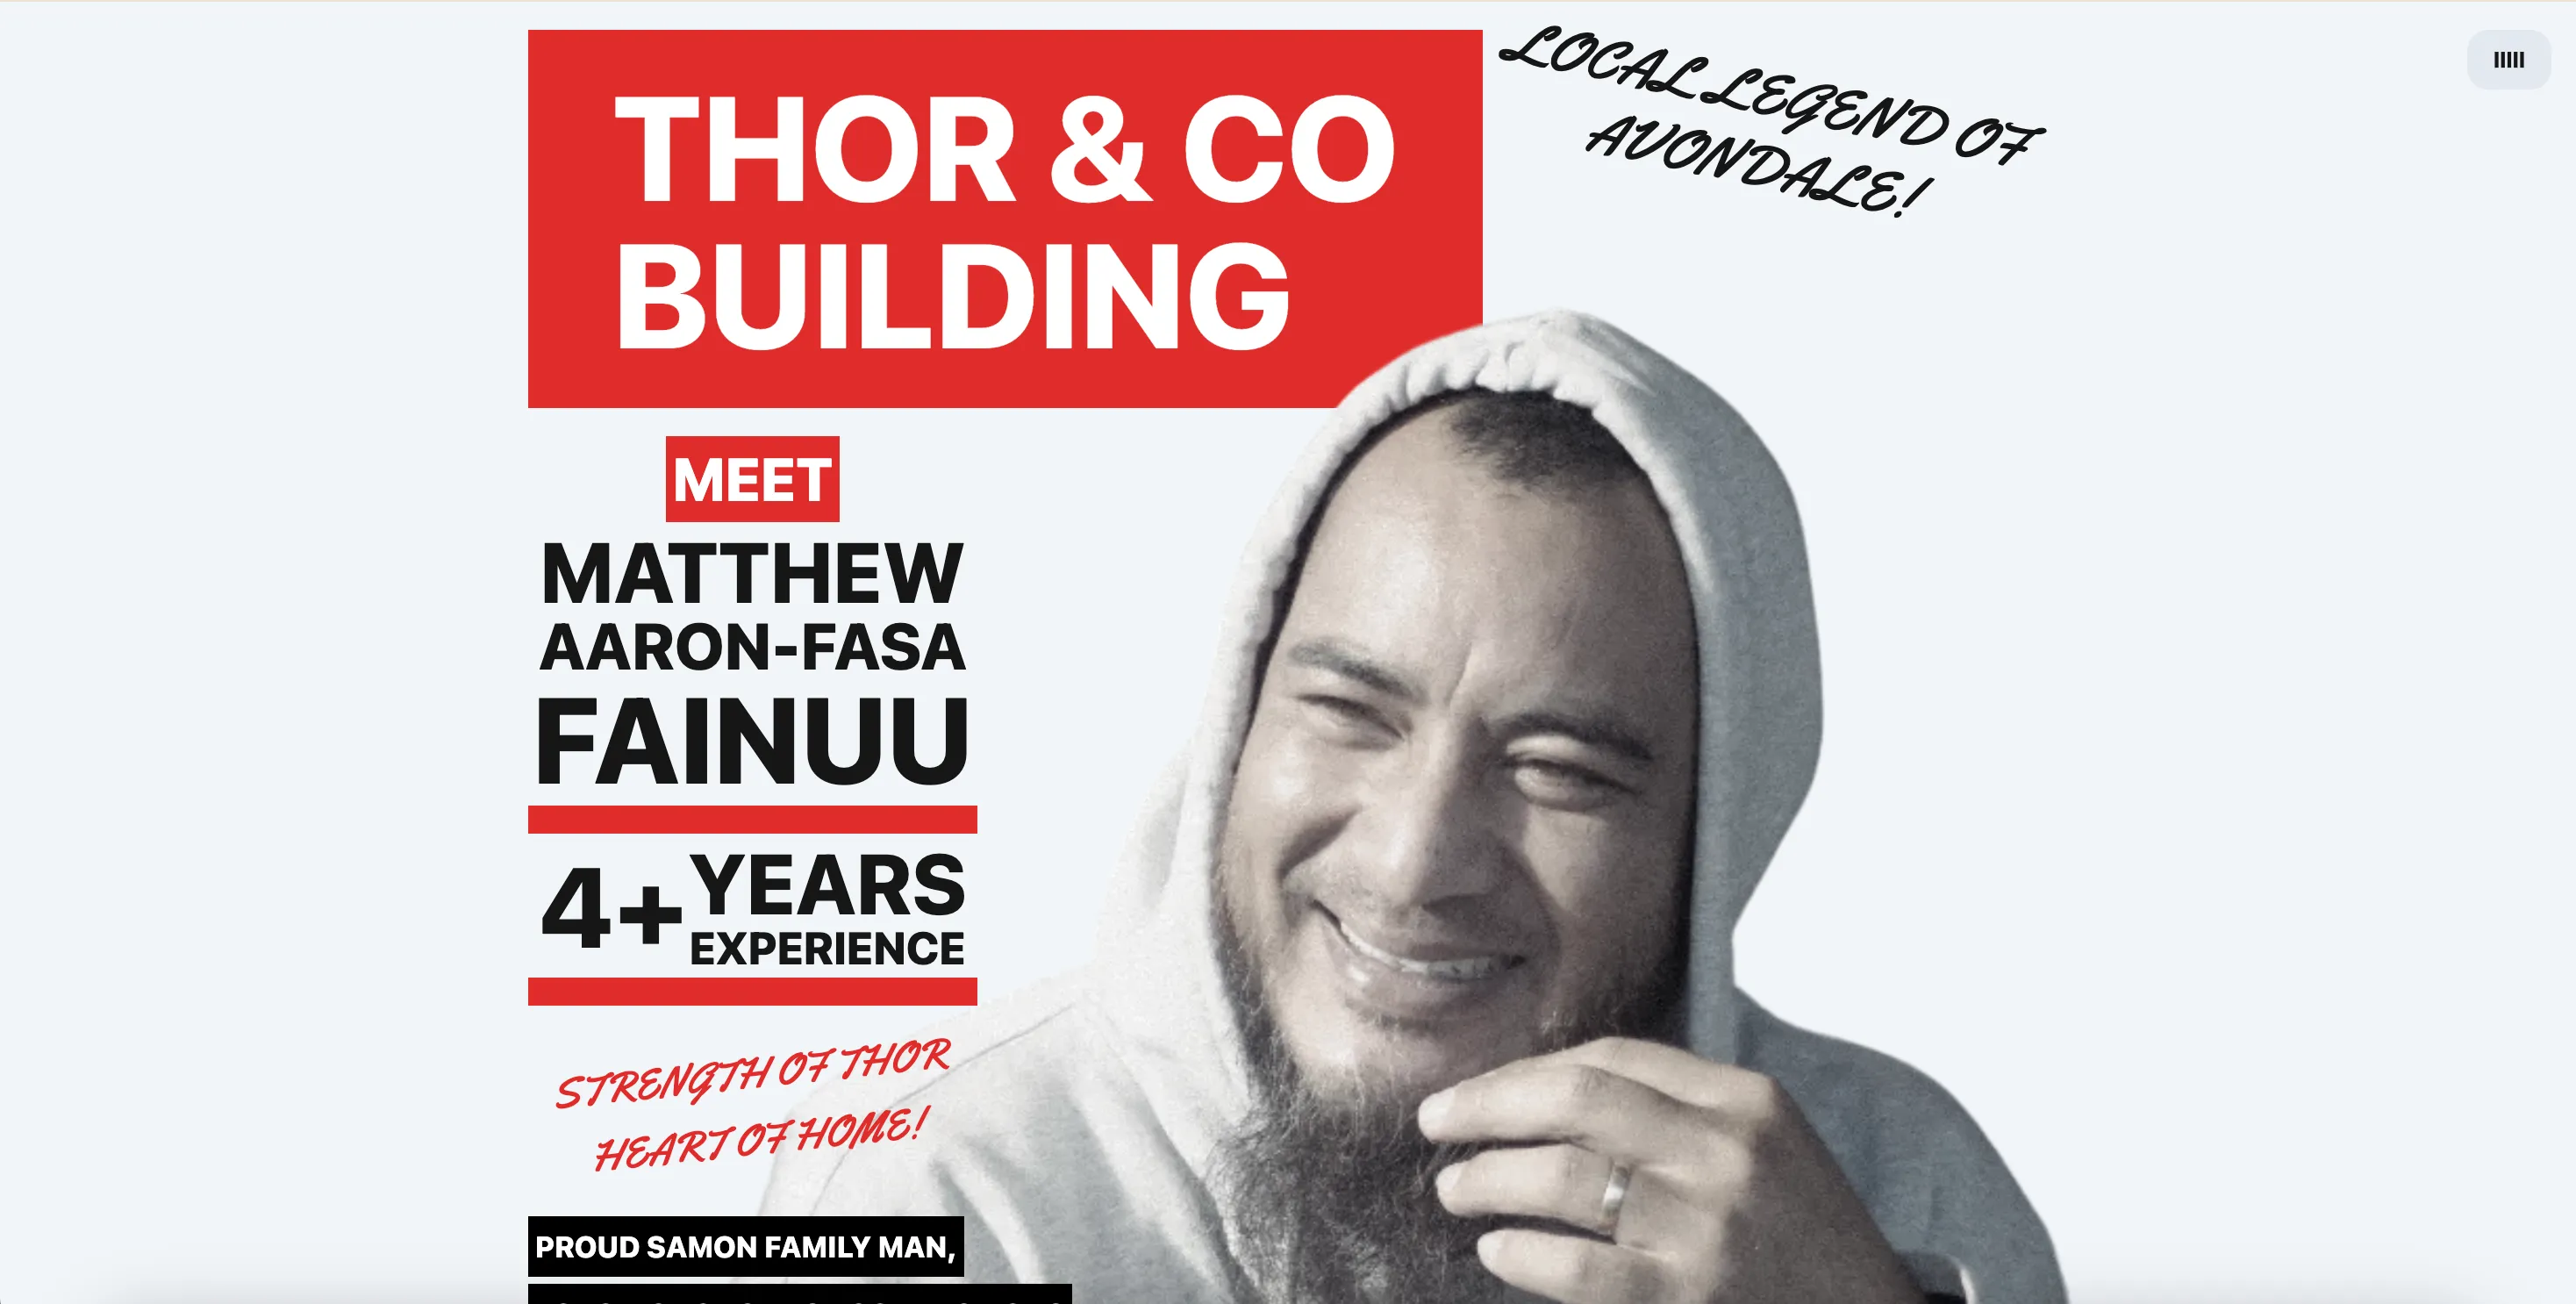 Thor and Co Building